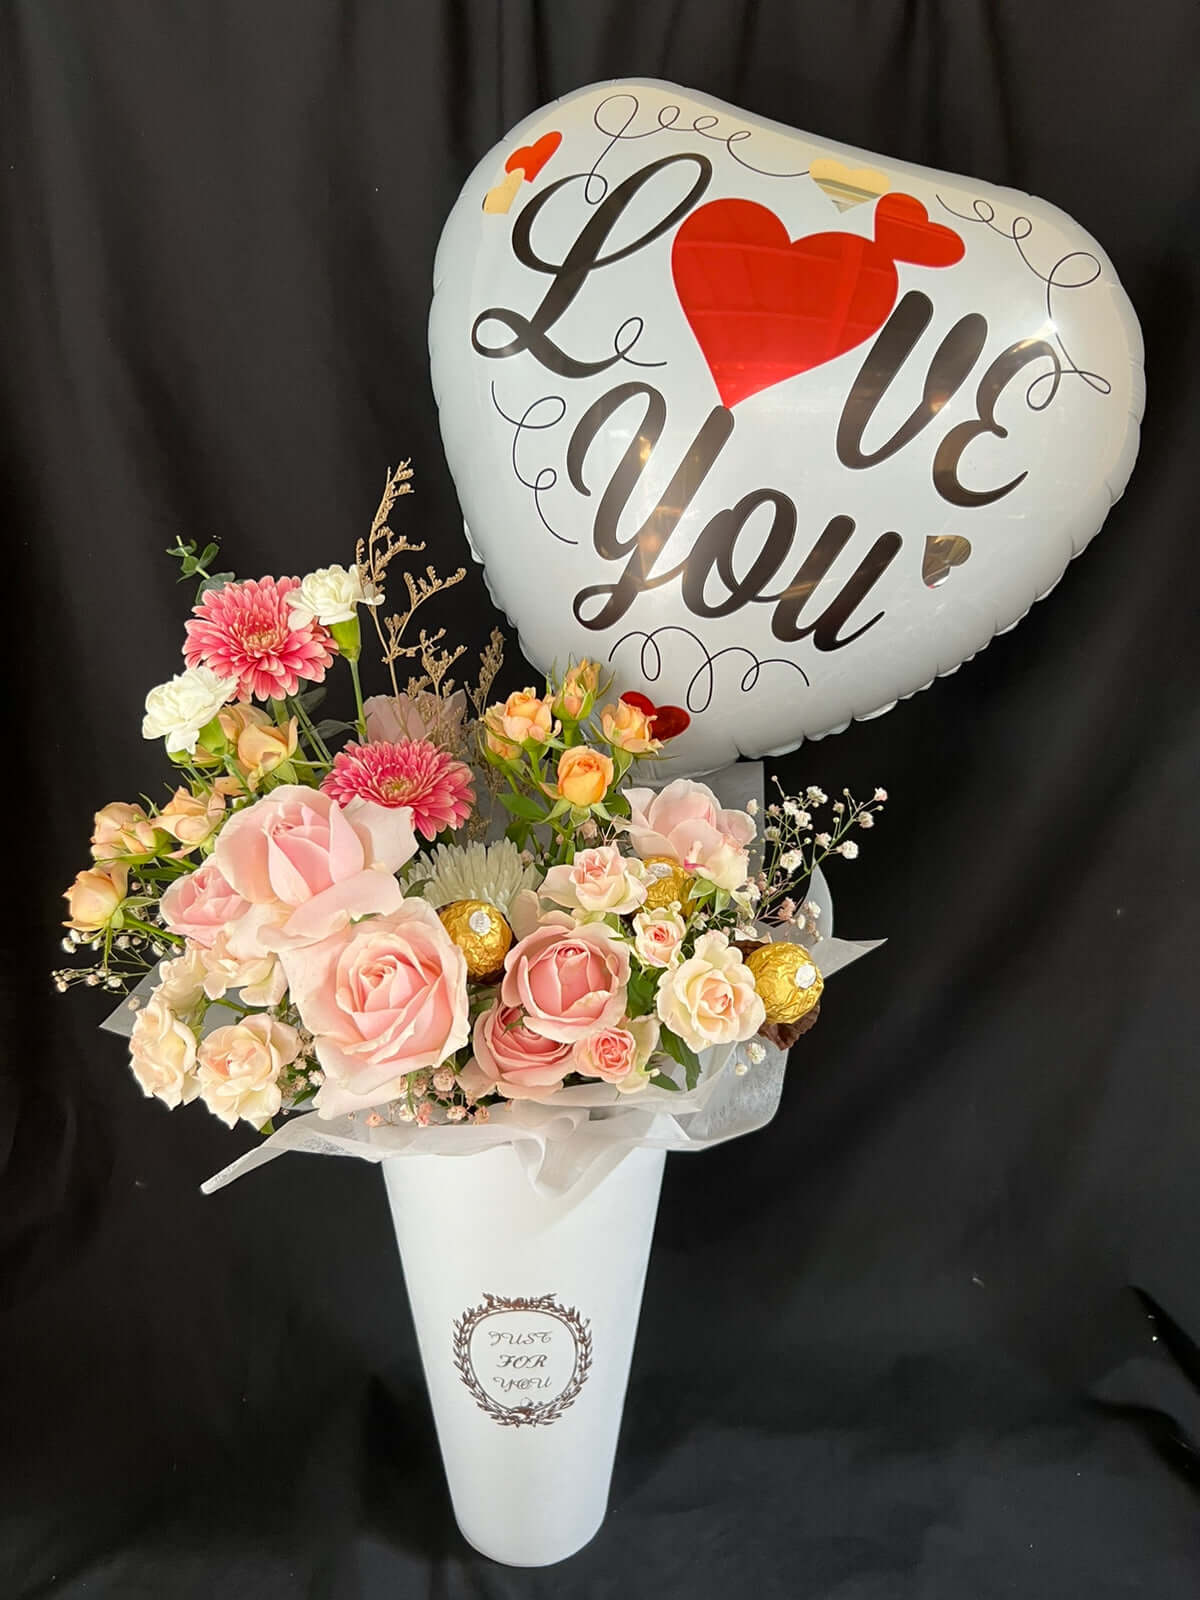 Sweetest-Love-Roses-Mixad-Flowers-Chocolates-Box-heart-balloon--DodoMarket-Delivery-Mauritius